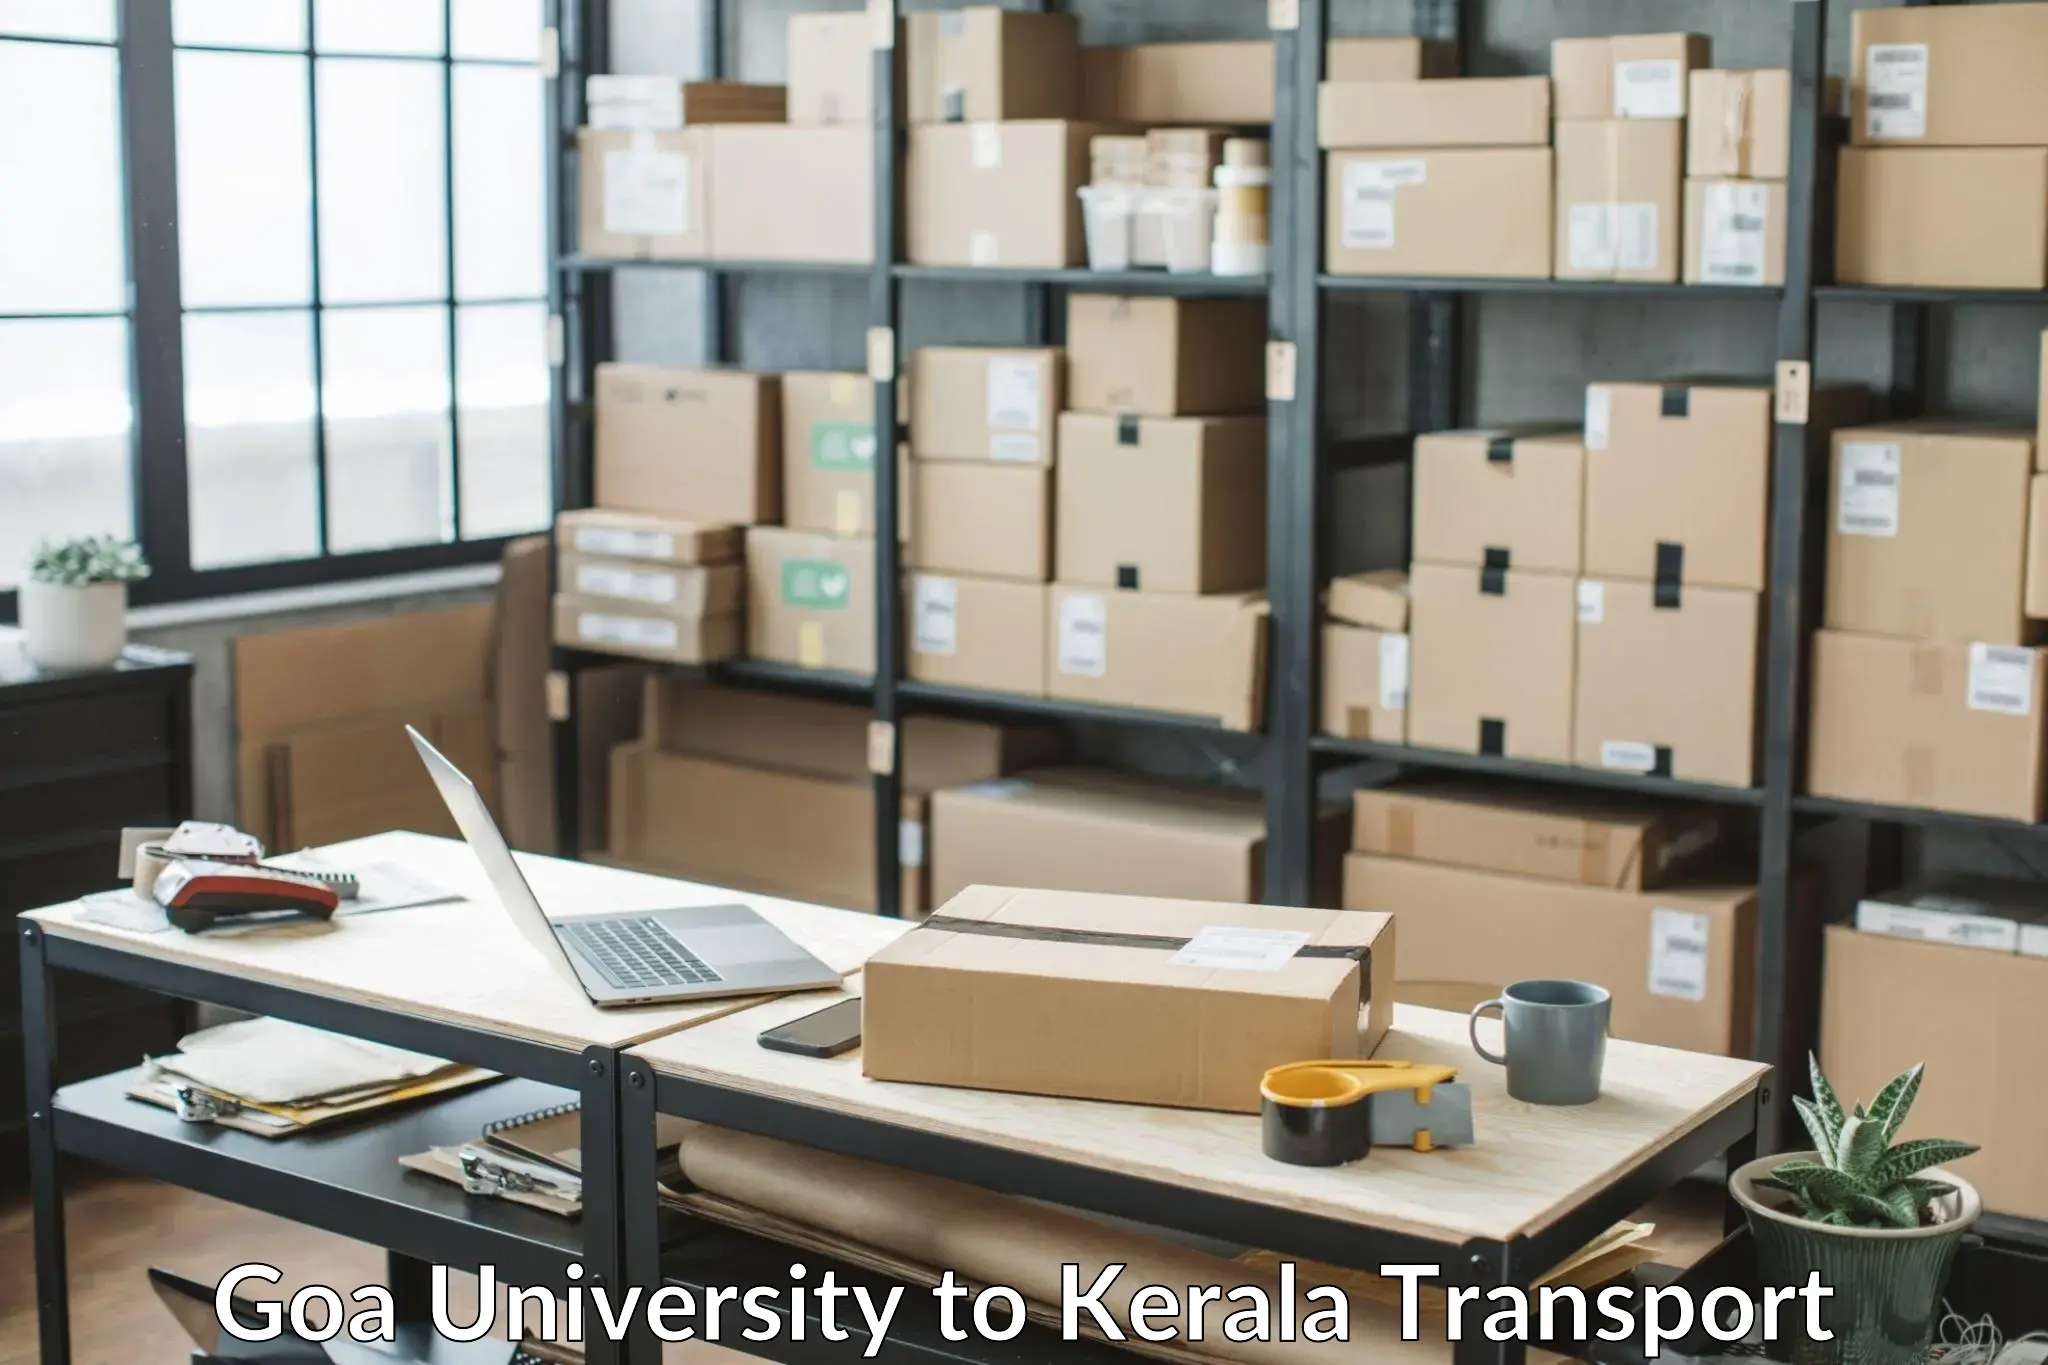 Commercial transport service Goa University to Chalakudy